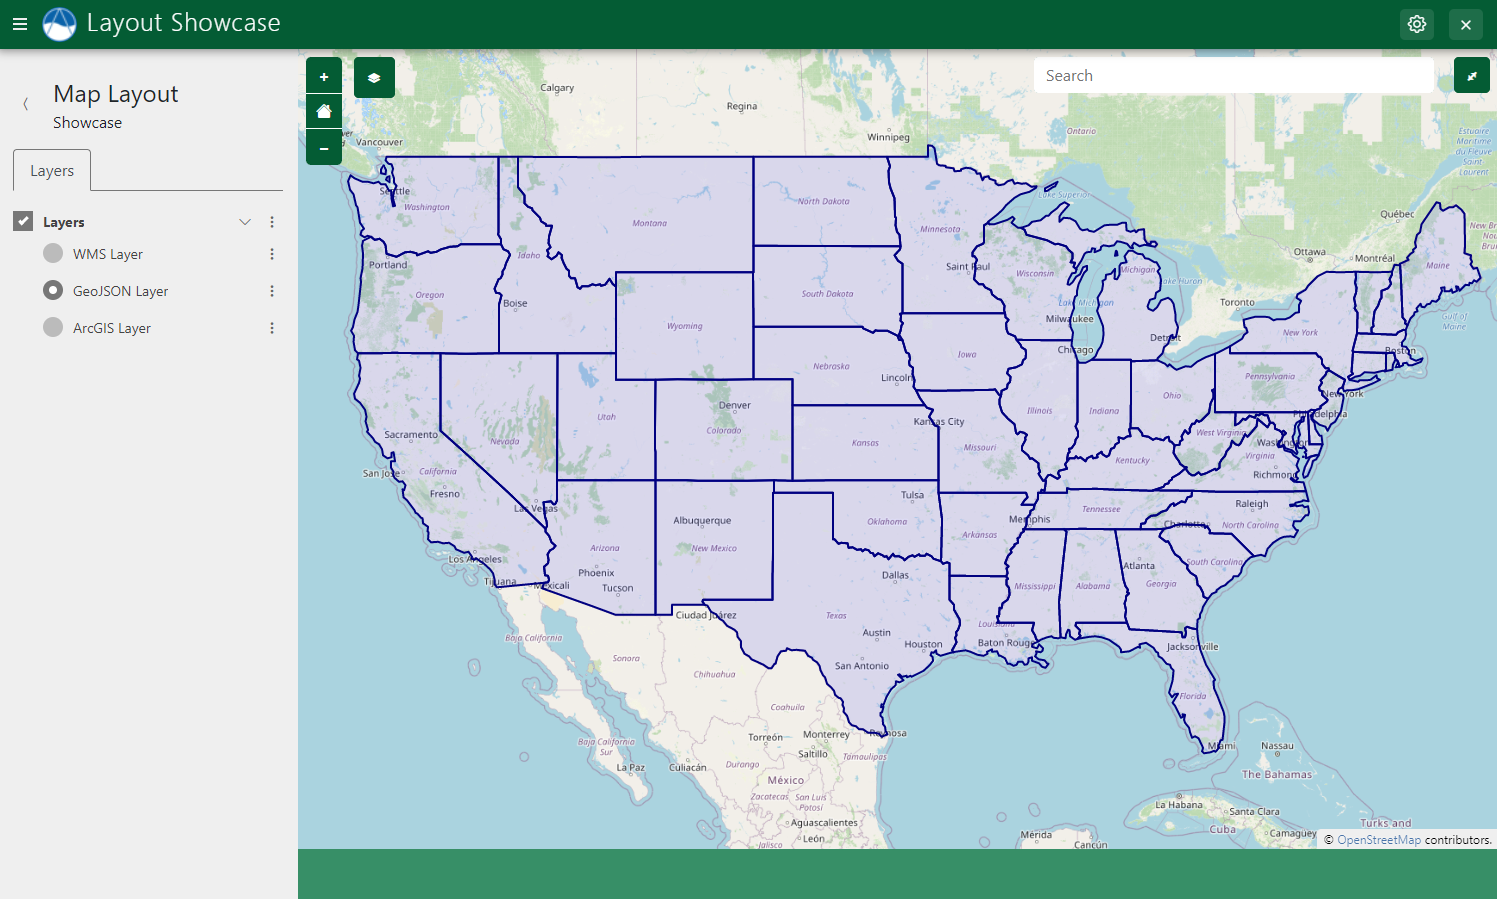 ../../_images/map_layout_geojson_layer.png